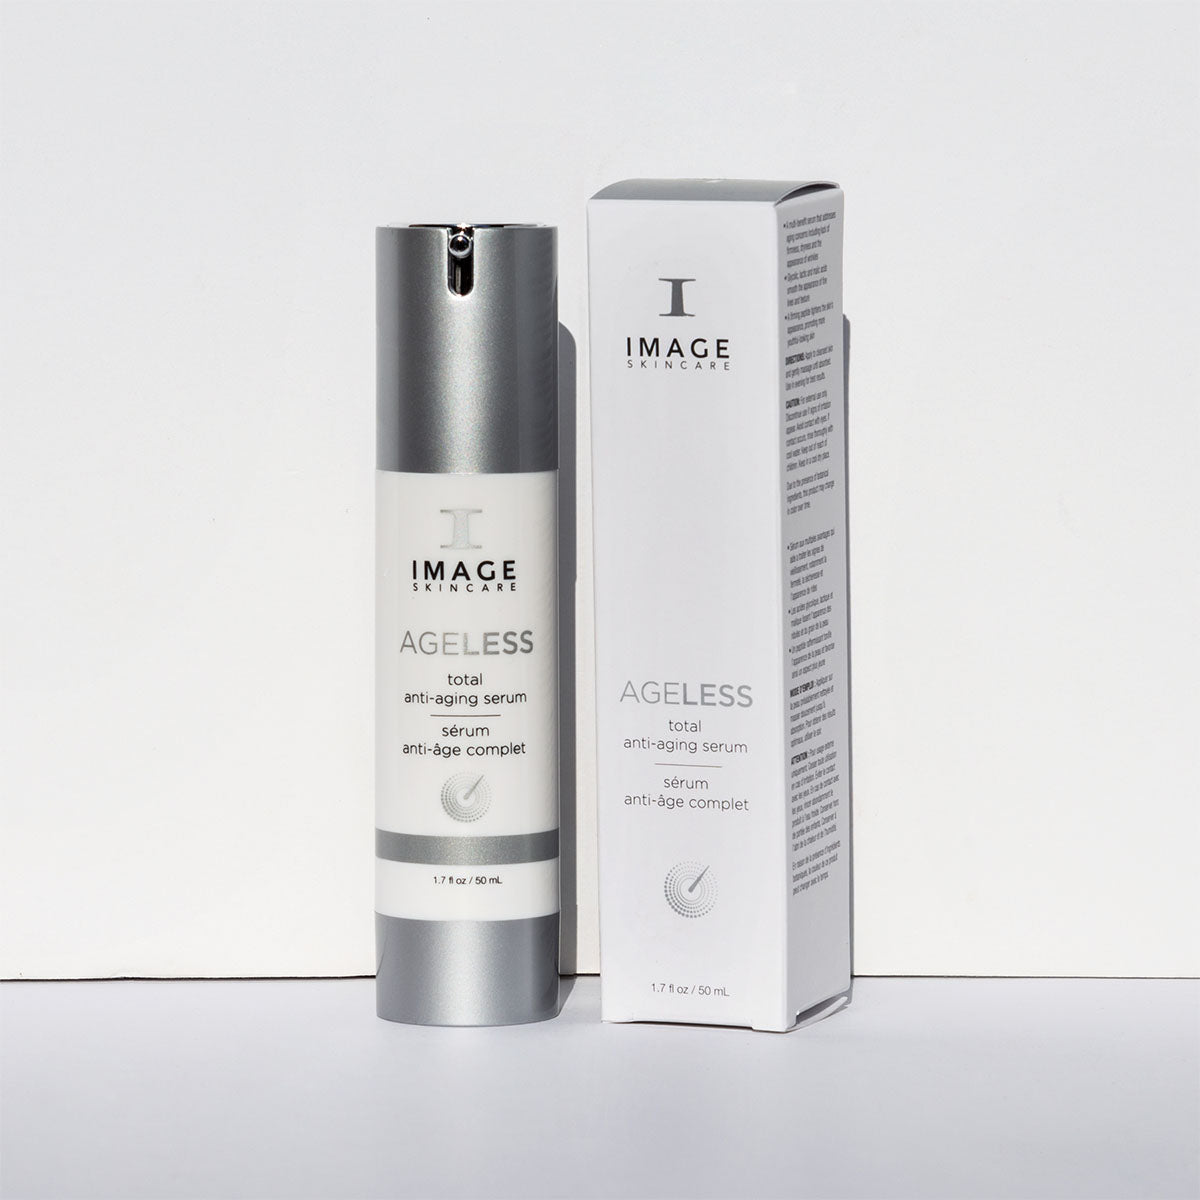 IMAGE Skincare Ageless Total Anti-Ageing Serum Bottle with Box.